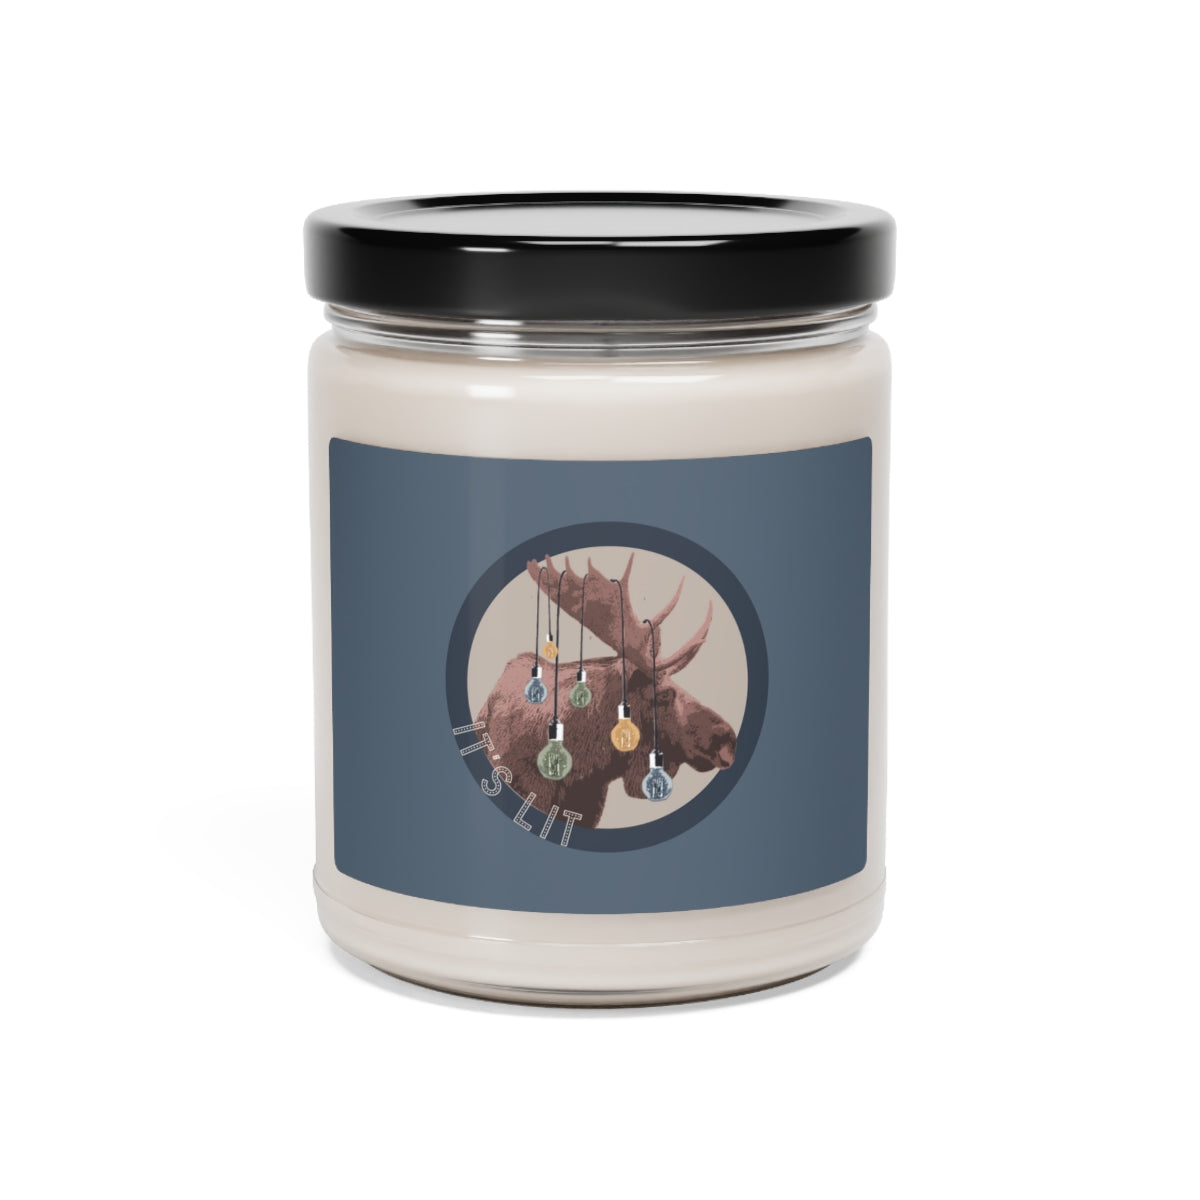 It's Lit Scented Soy Candle